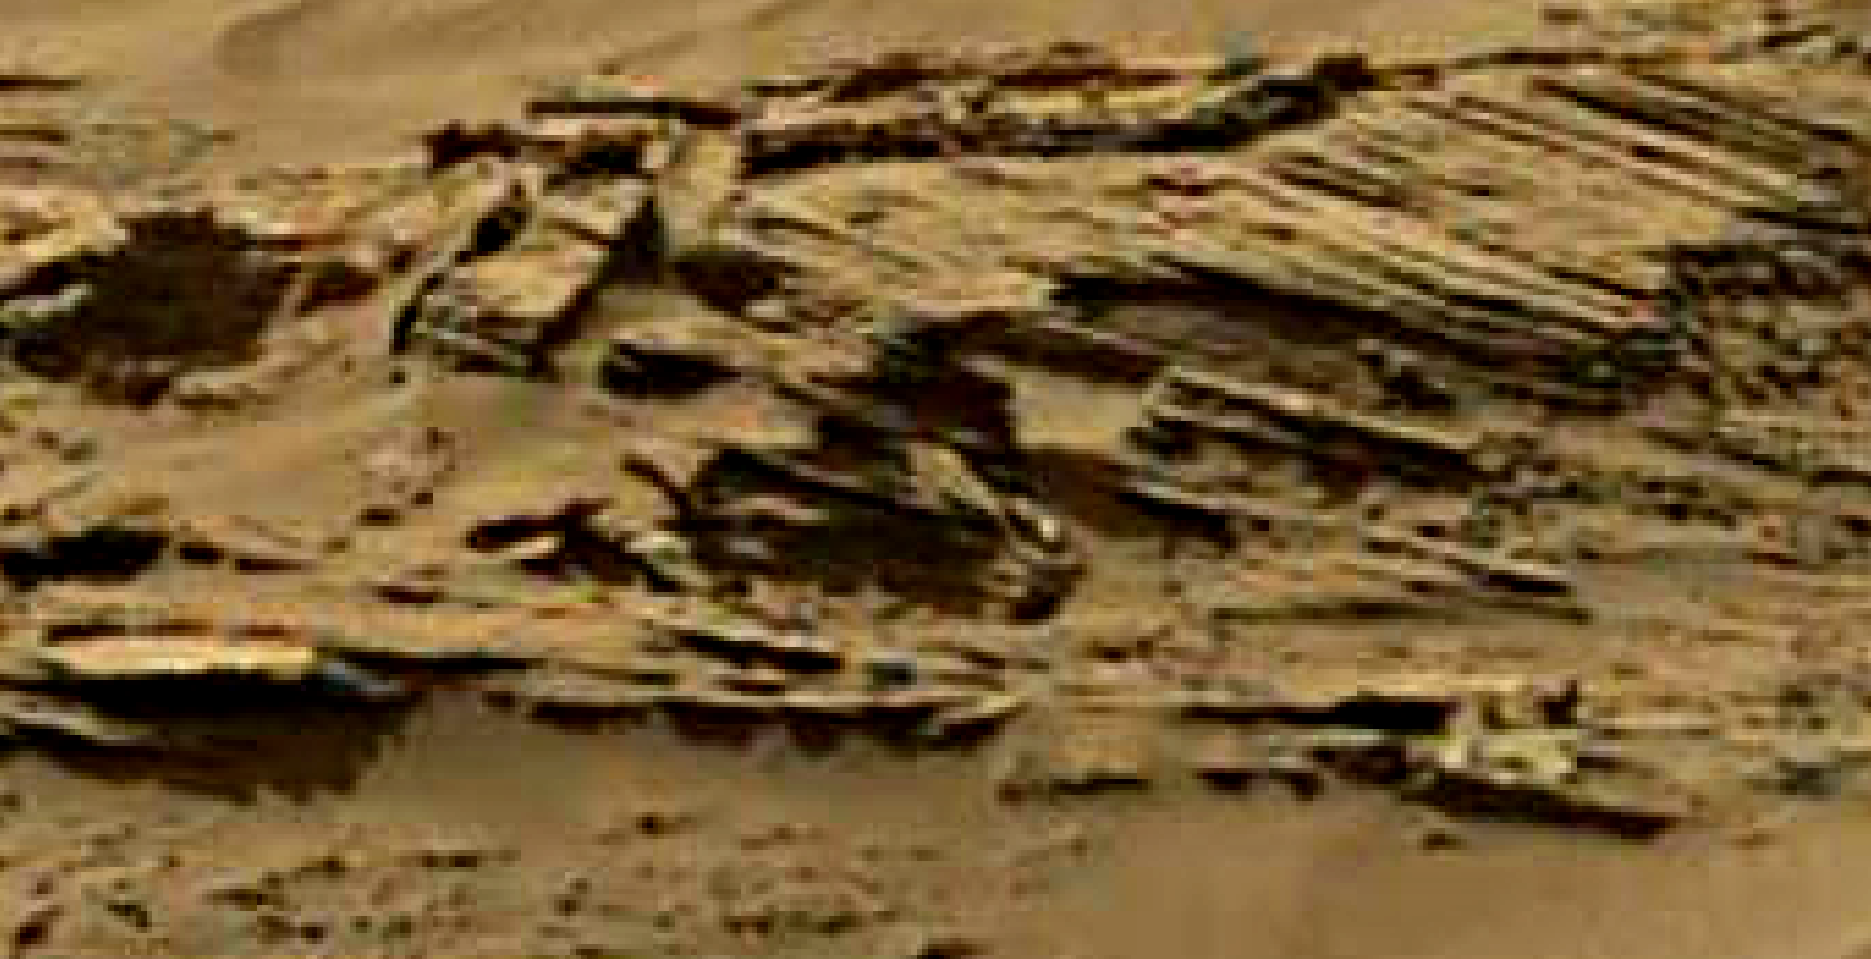 mars sol 1344 anomaly-artifacts 9 was life on mars